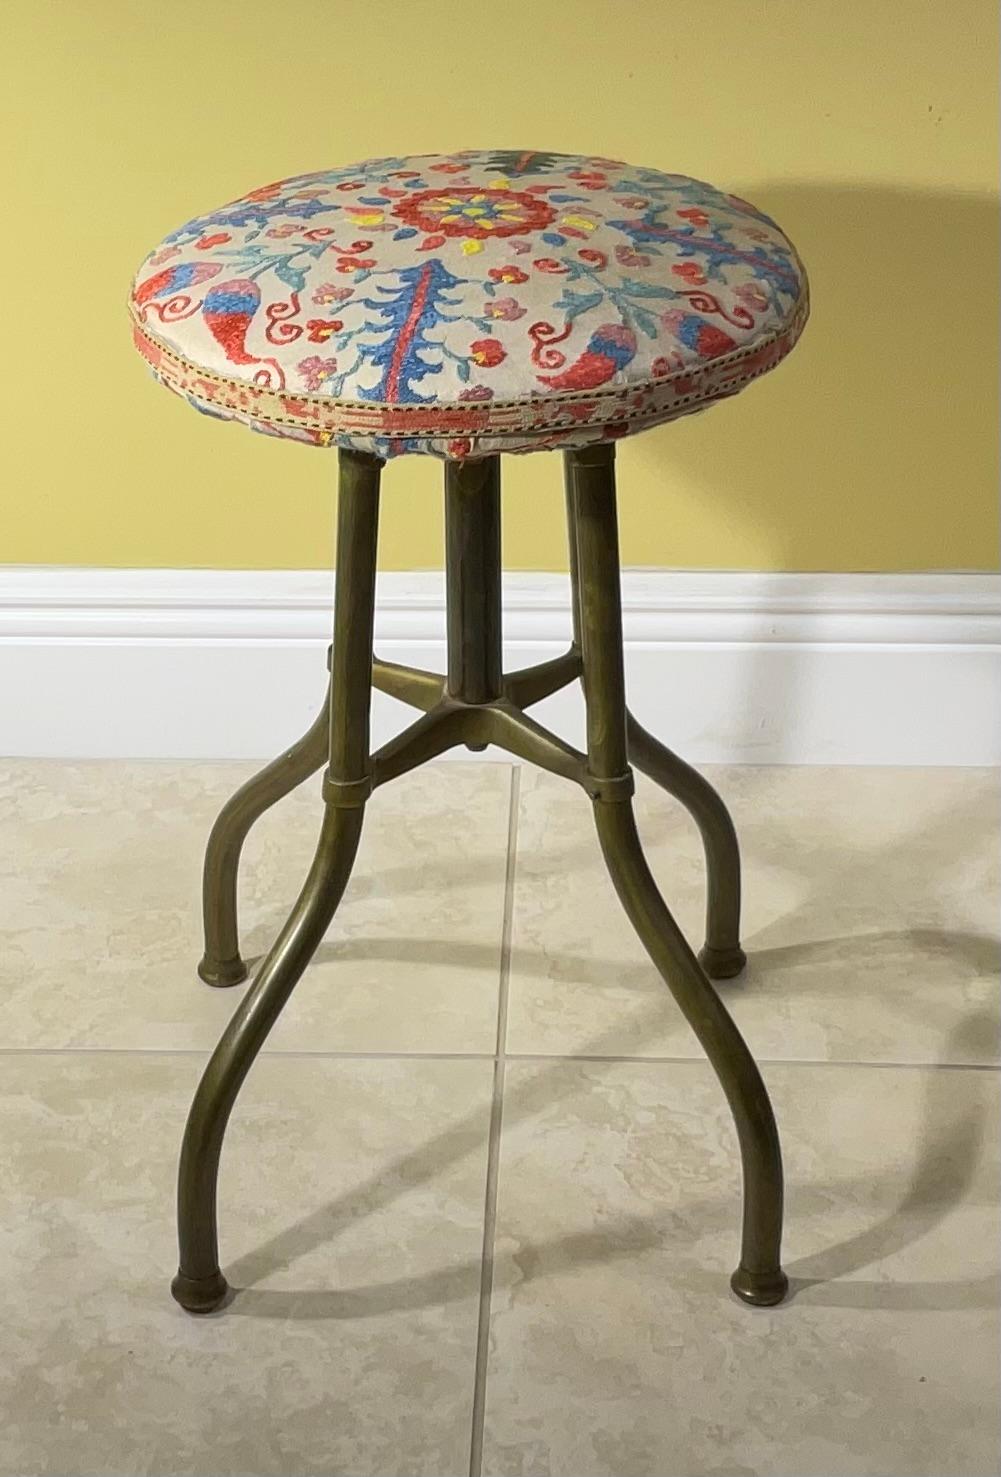 Exceptional vintage  swivel stool made of solid brass ,  upholster with beautiful hand embroidery vintage Suzani textile , silk embroidered flowers and vine with wine and turquoise colors, nice antique hand embroidery geometric suzani trimming